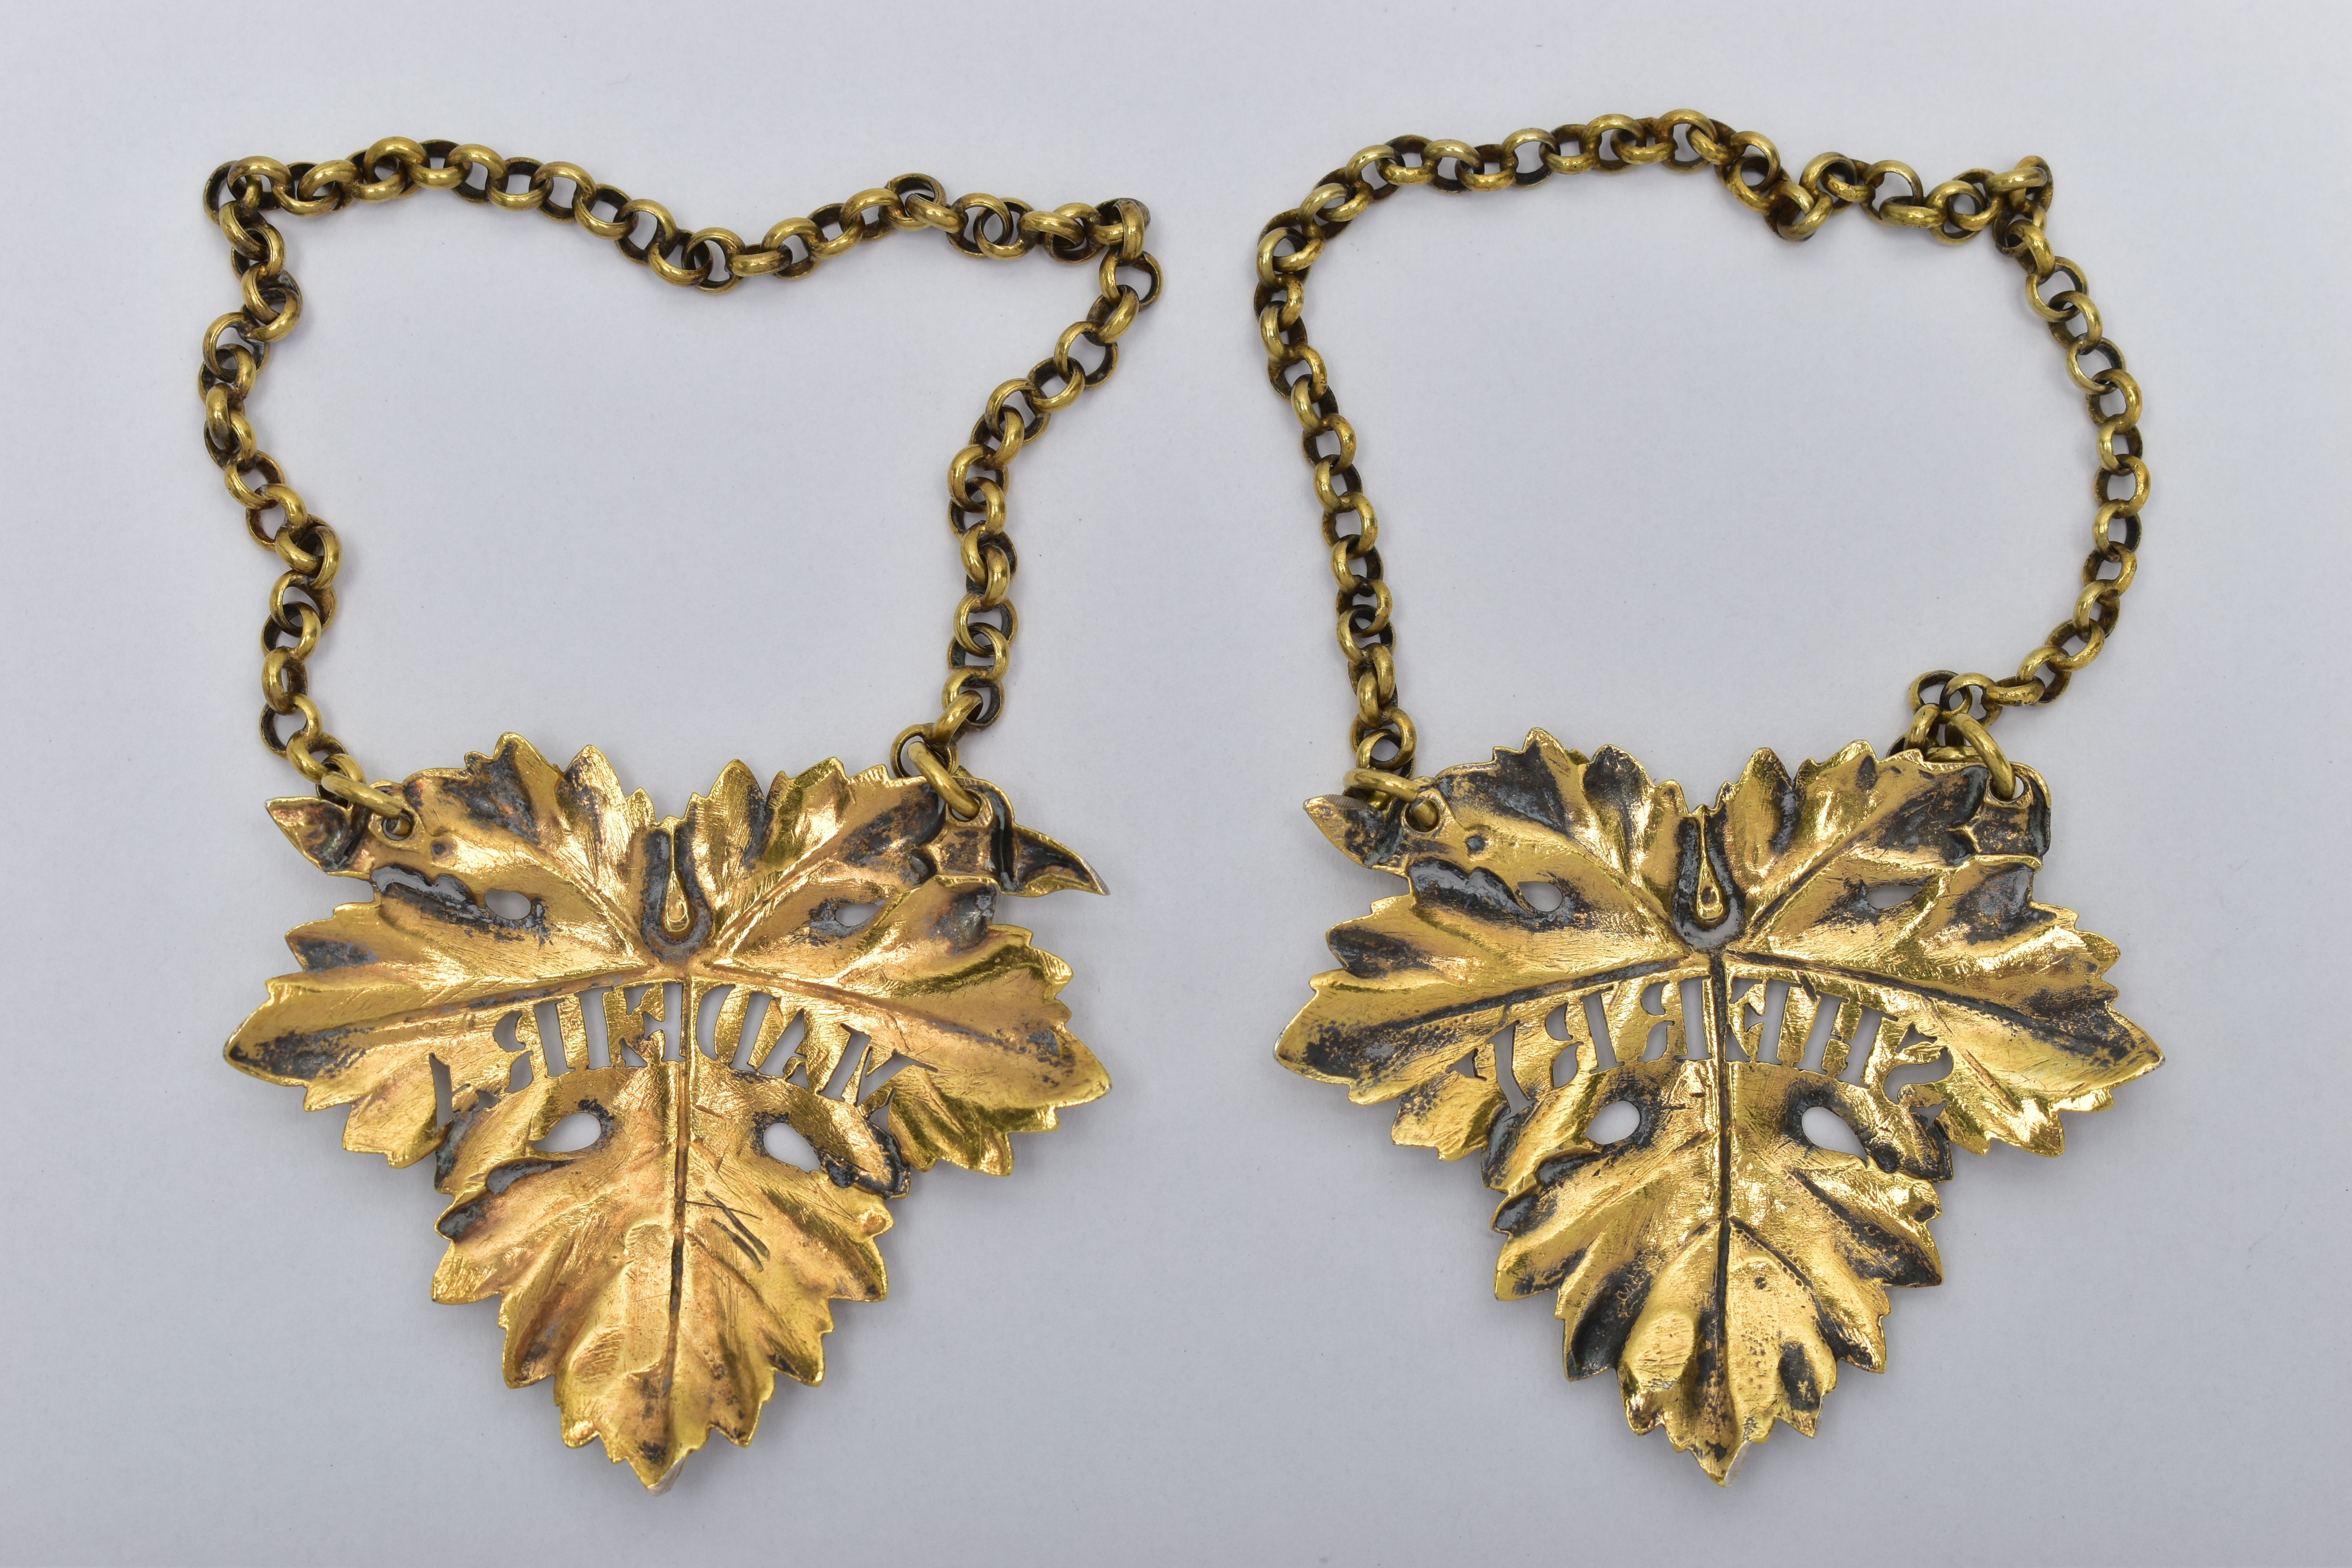 A PAIR OF GEORGE IV SILVER GILT DECANTER LABELS, cast as vine leaves, named for 'SHERRY' and ' - Image 2 of 3